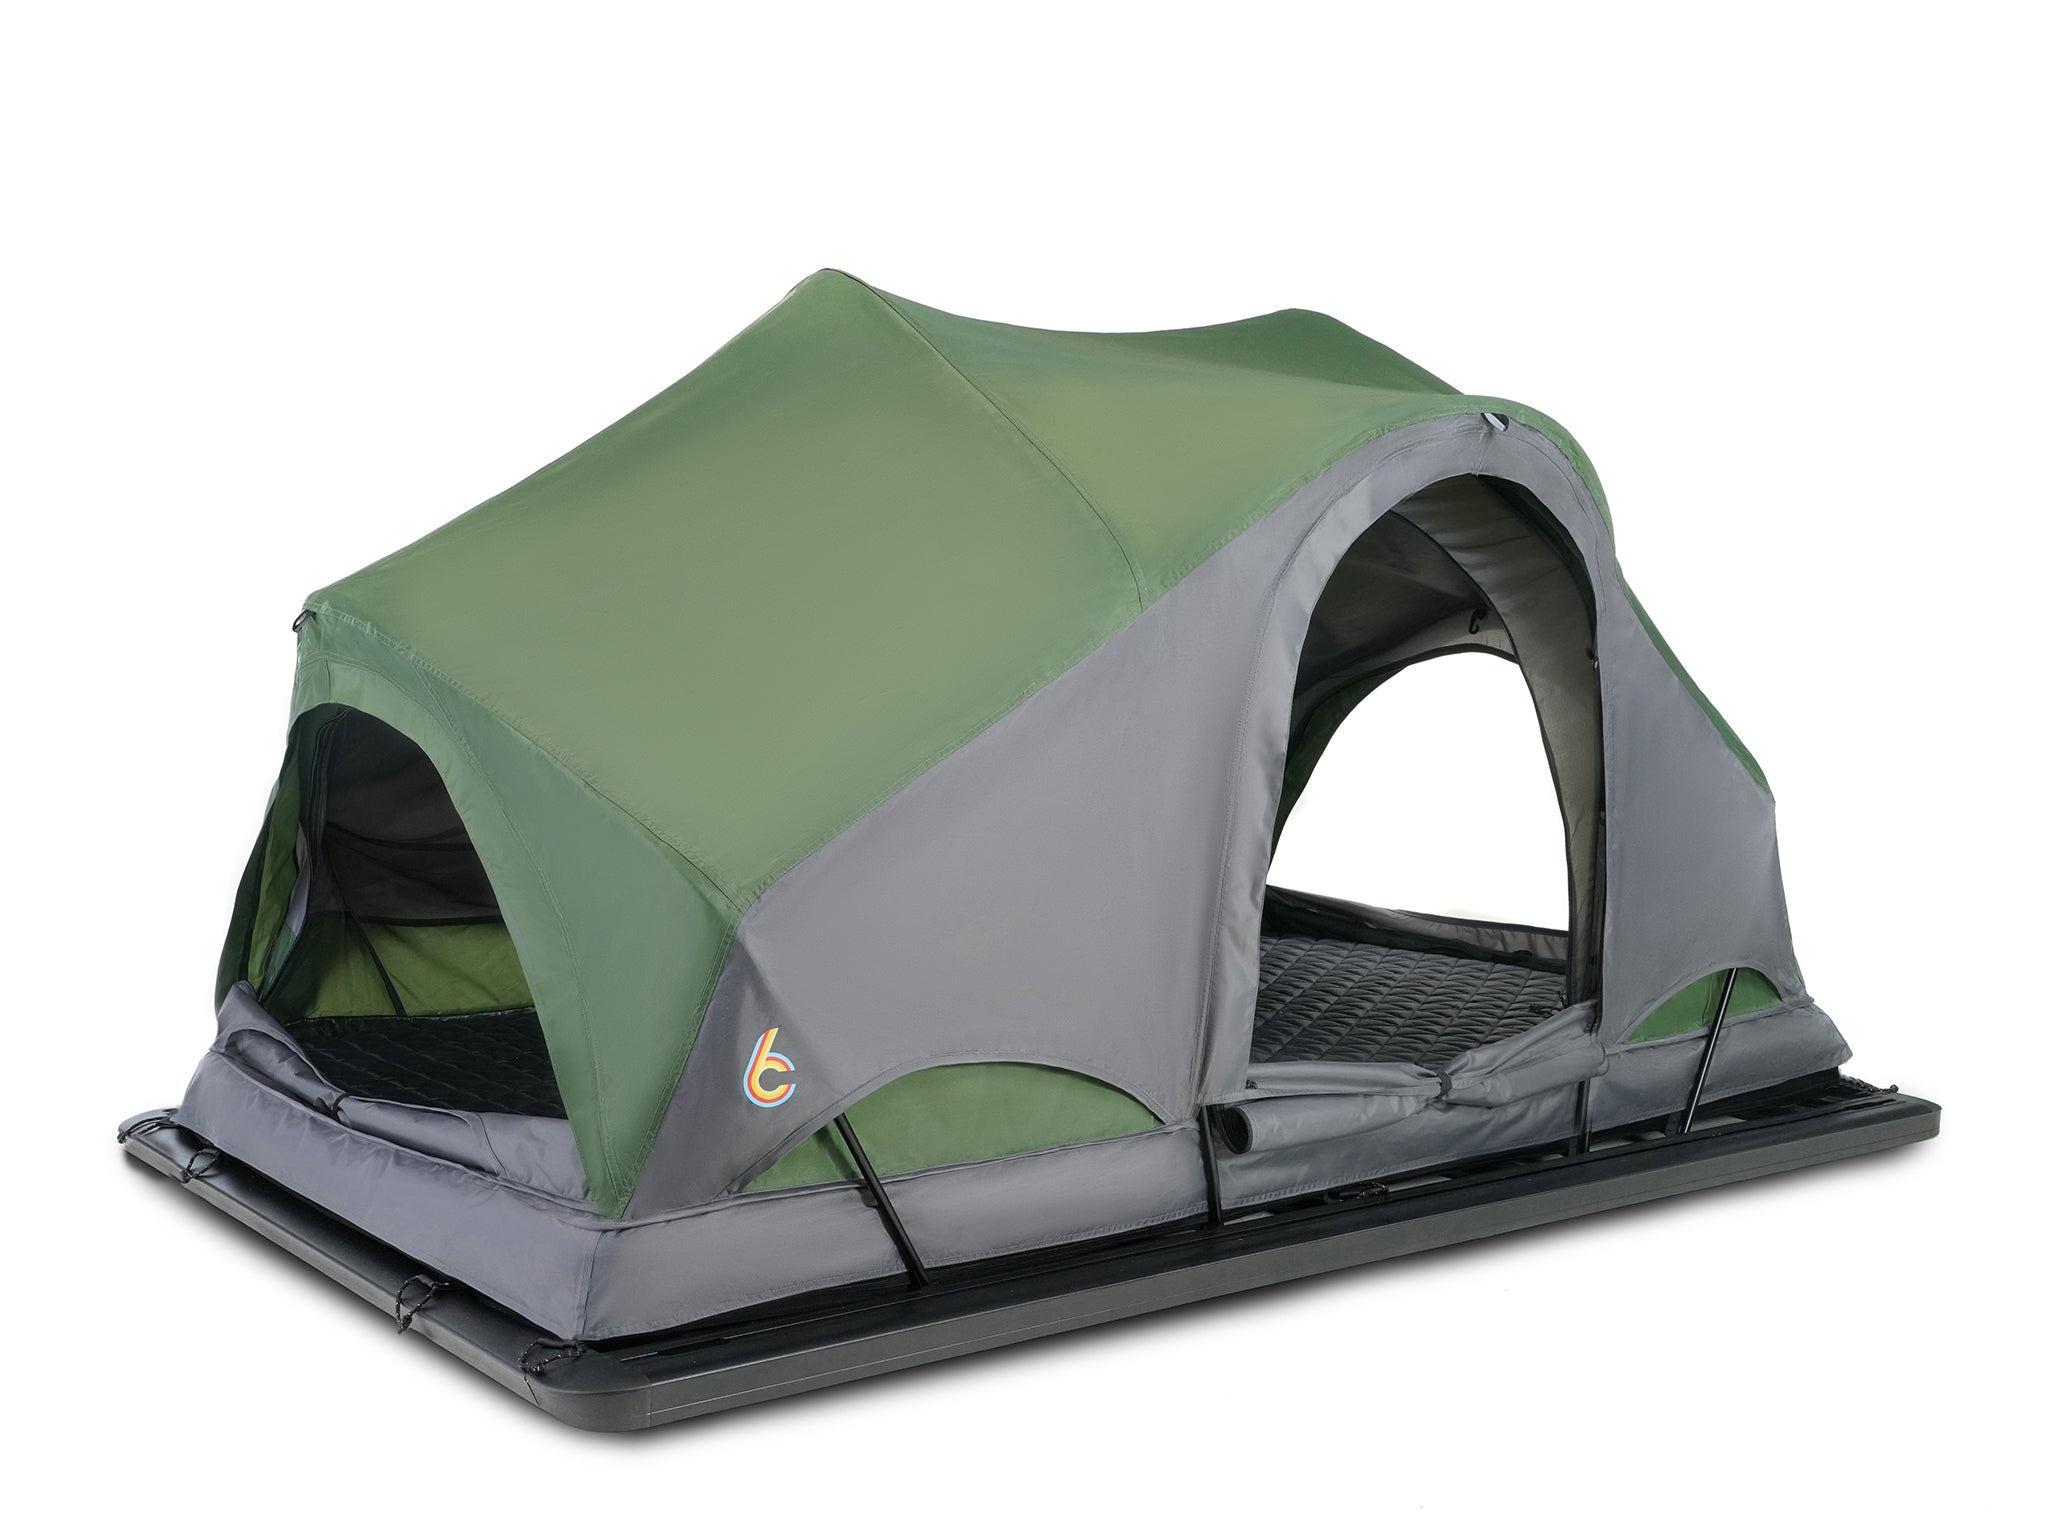   Rev Rack Tent Other style open